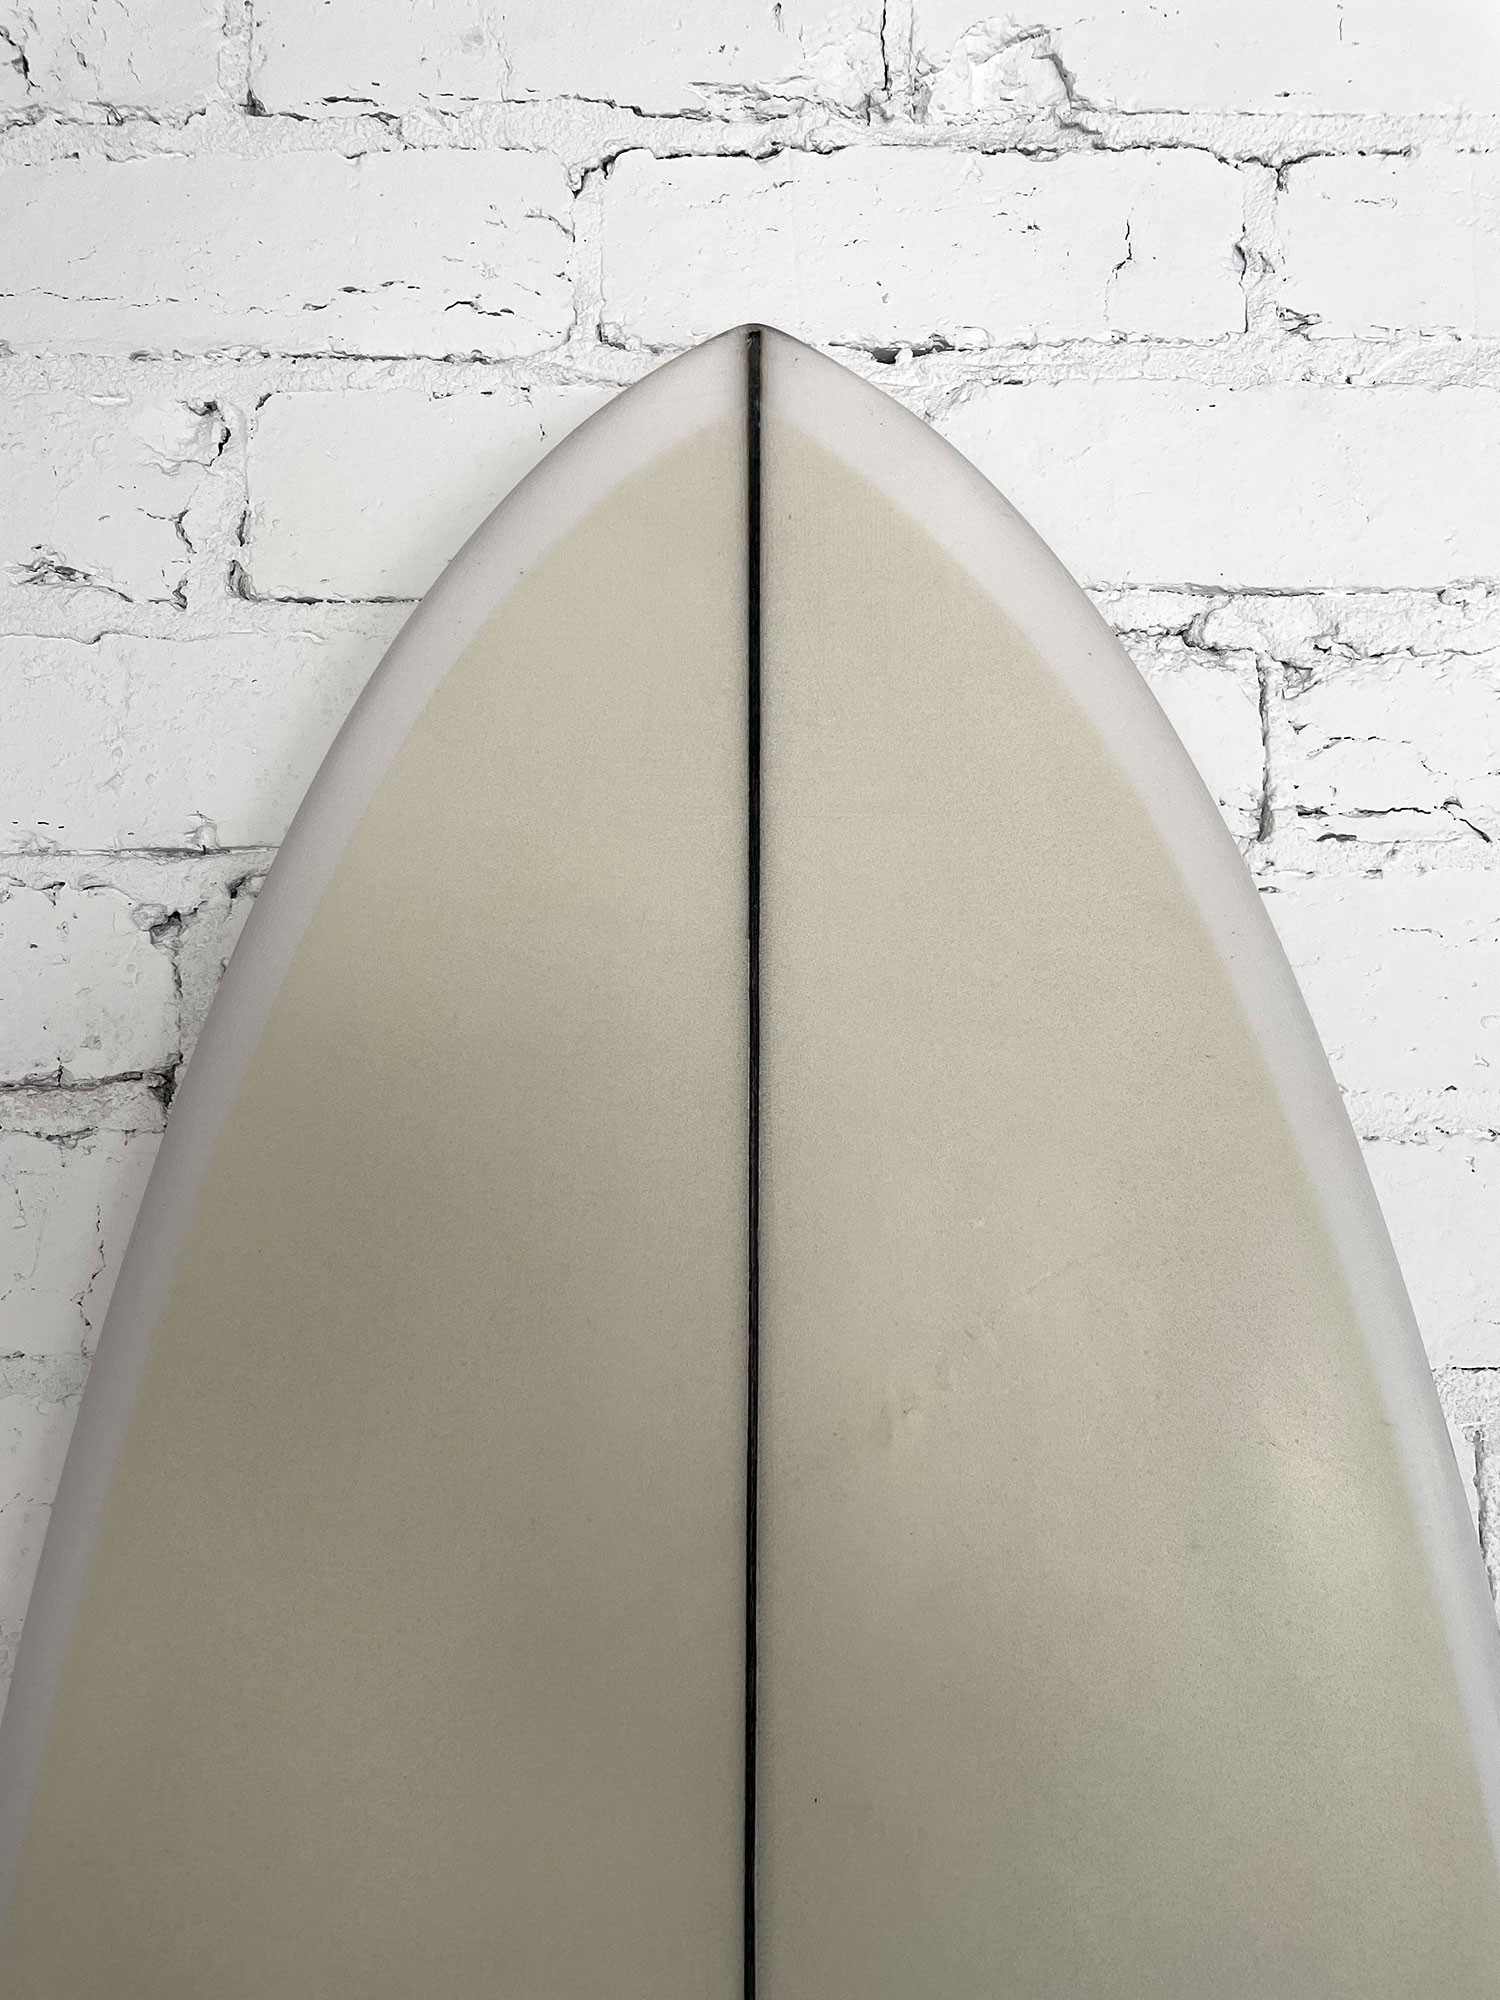 Chilli Surfboards Mid Strength Review